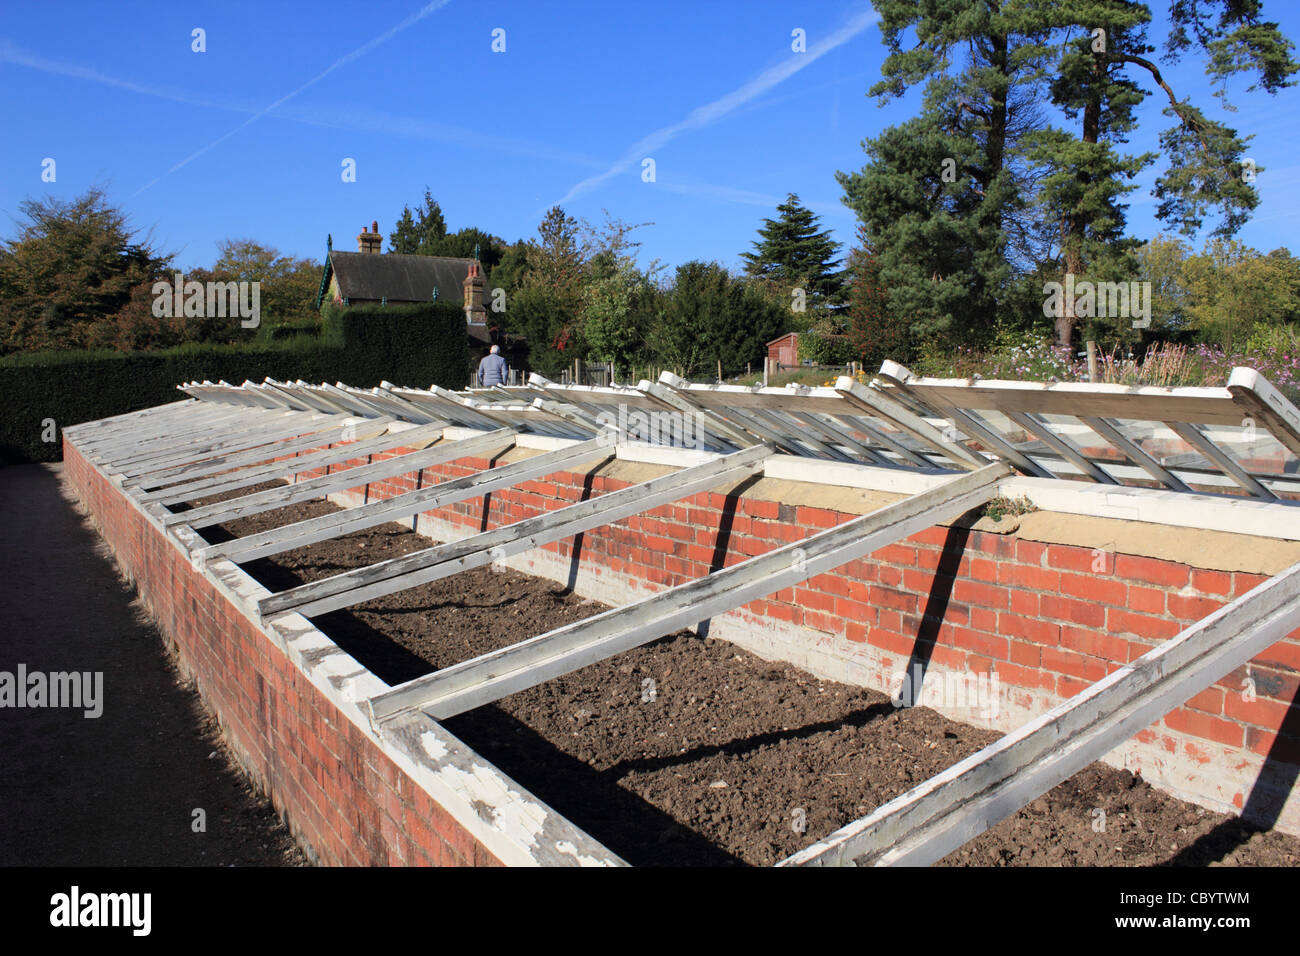 Brick and glass cold frame in country garden, Surrey England UK Stock Photo